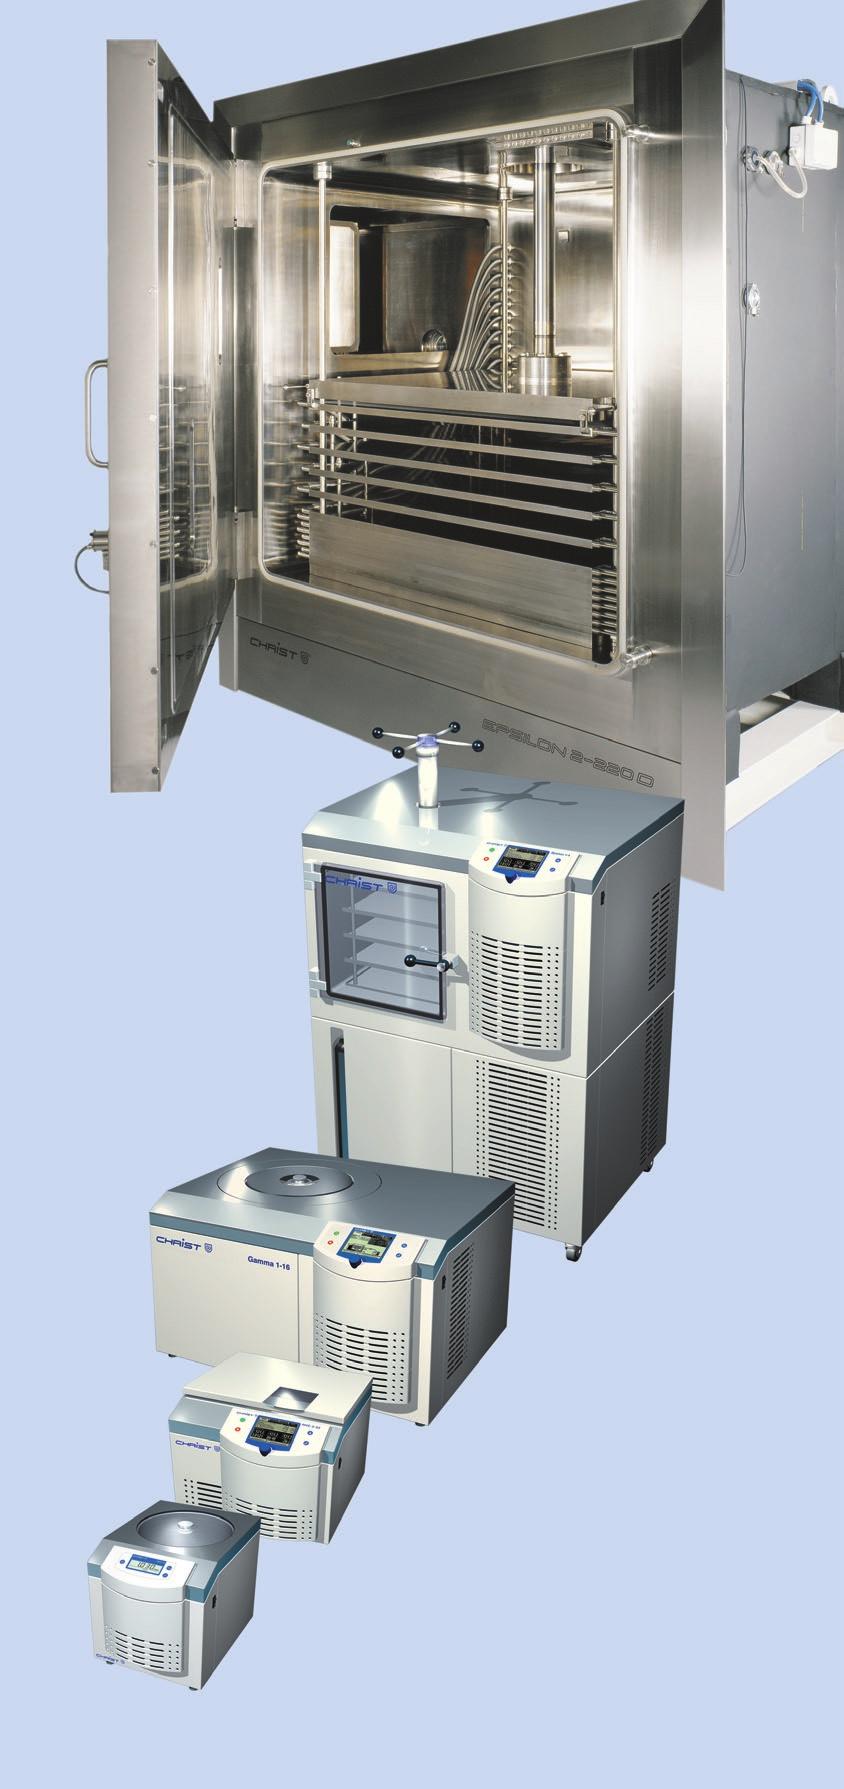 The product spectrum With a unique, broadly based program of products and accessories we supply freeze dryers and vacuum concentrators for all applications.